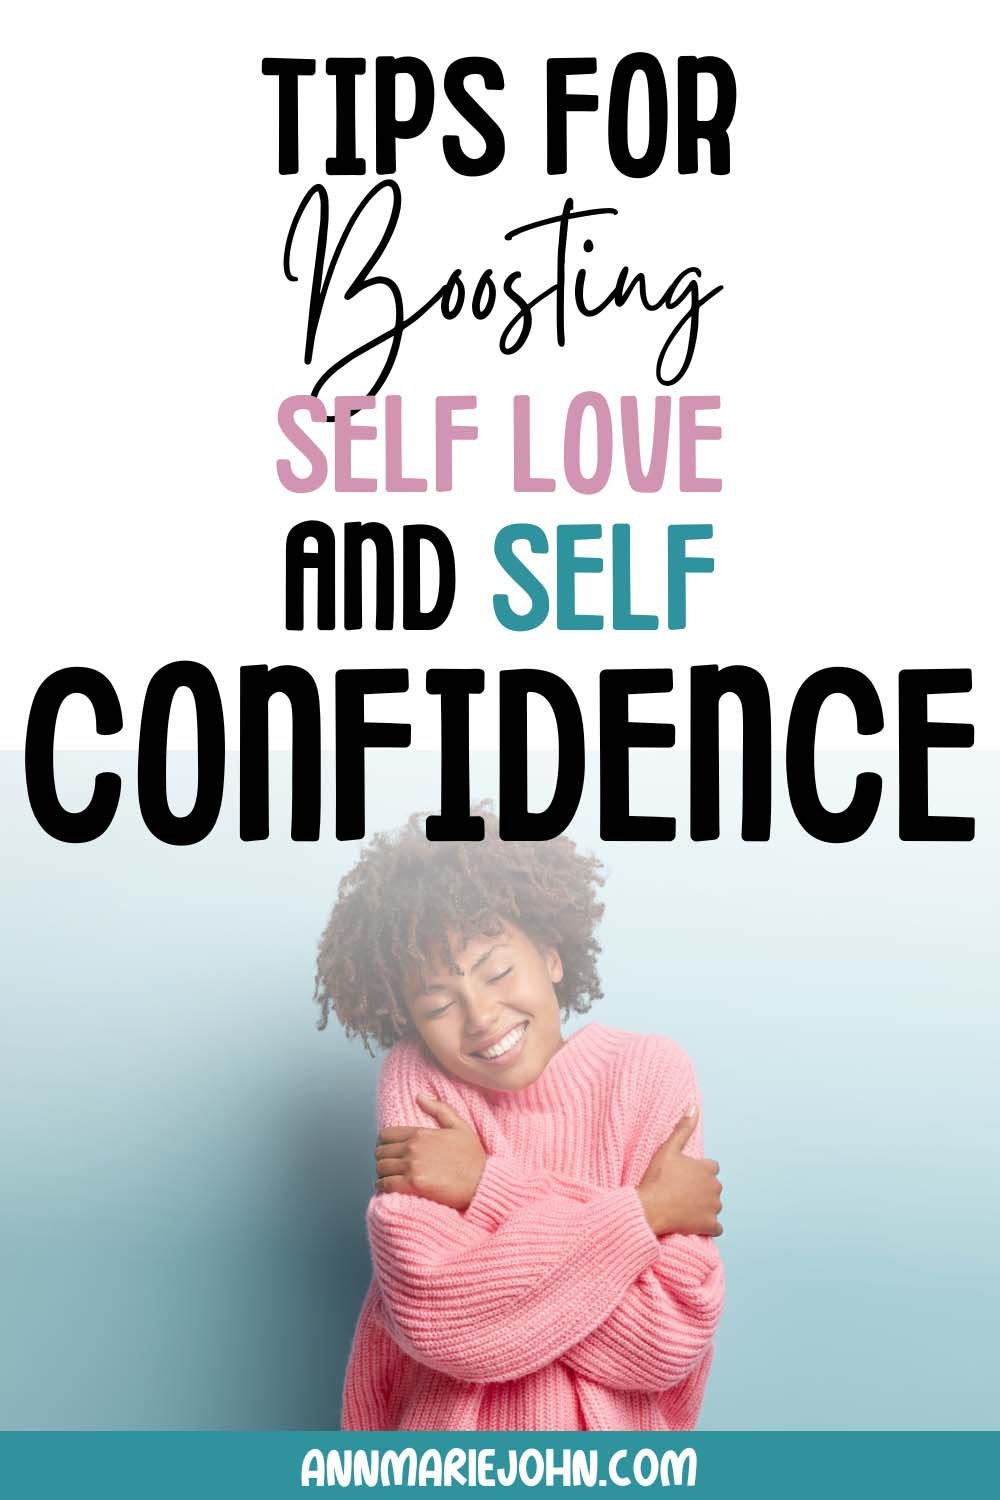 Tips for Boosting Self-Confidence and Self-Love